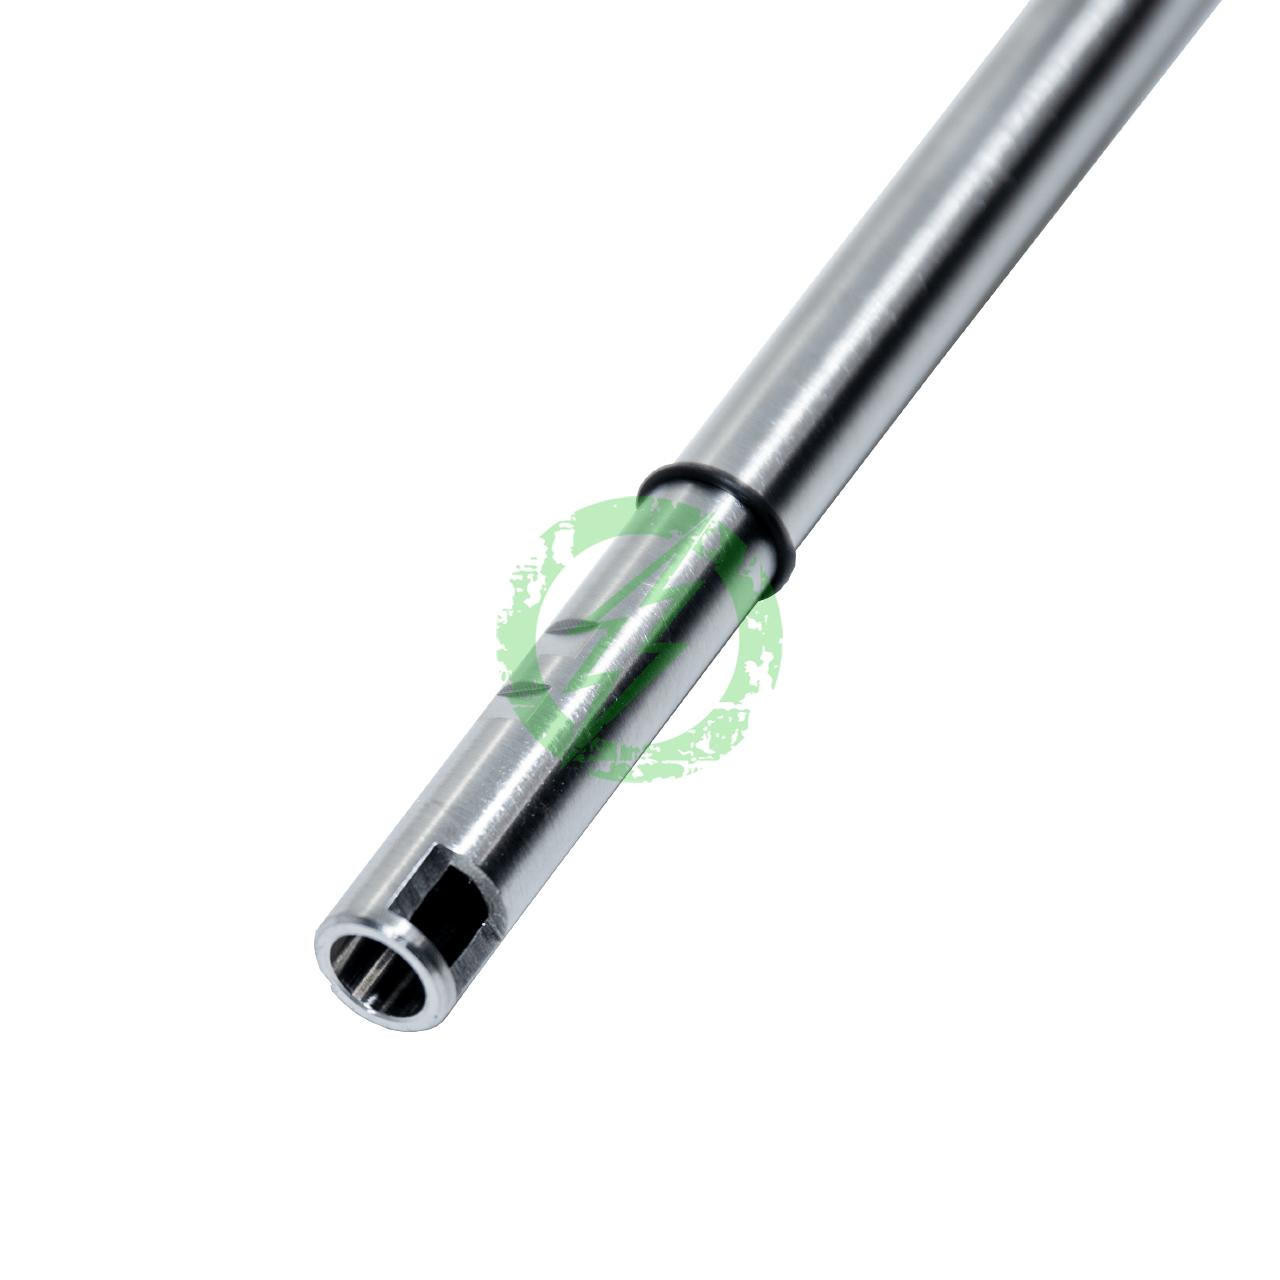  ZCI 208mm 6.03mm Stainless Steel Precision Tight Bore AEG Inner Barrel 